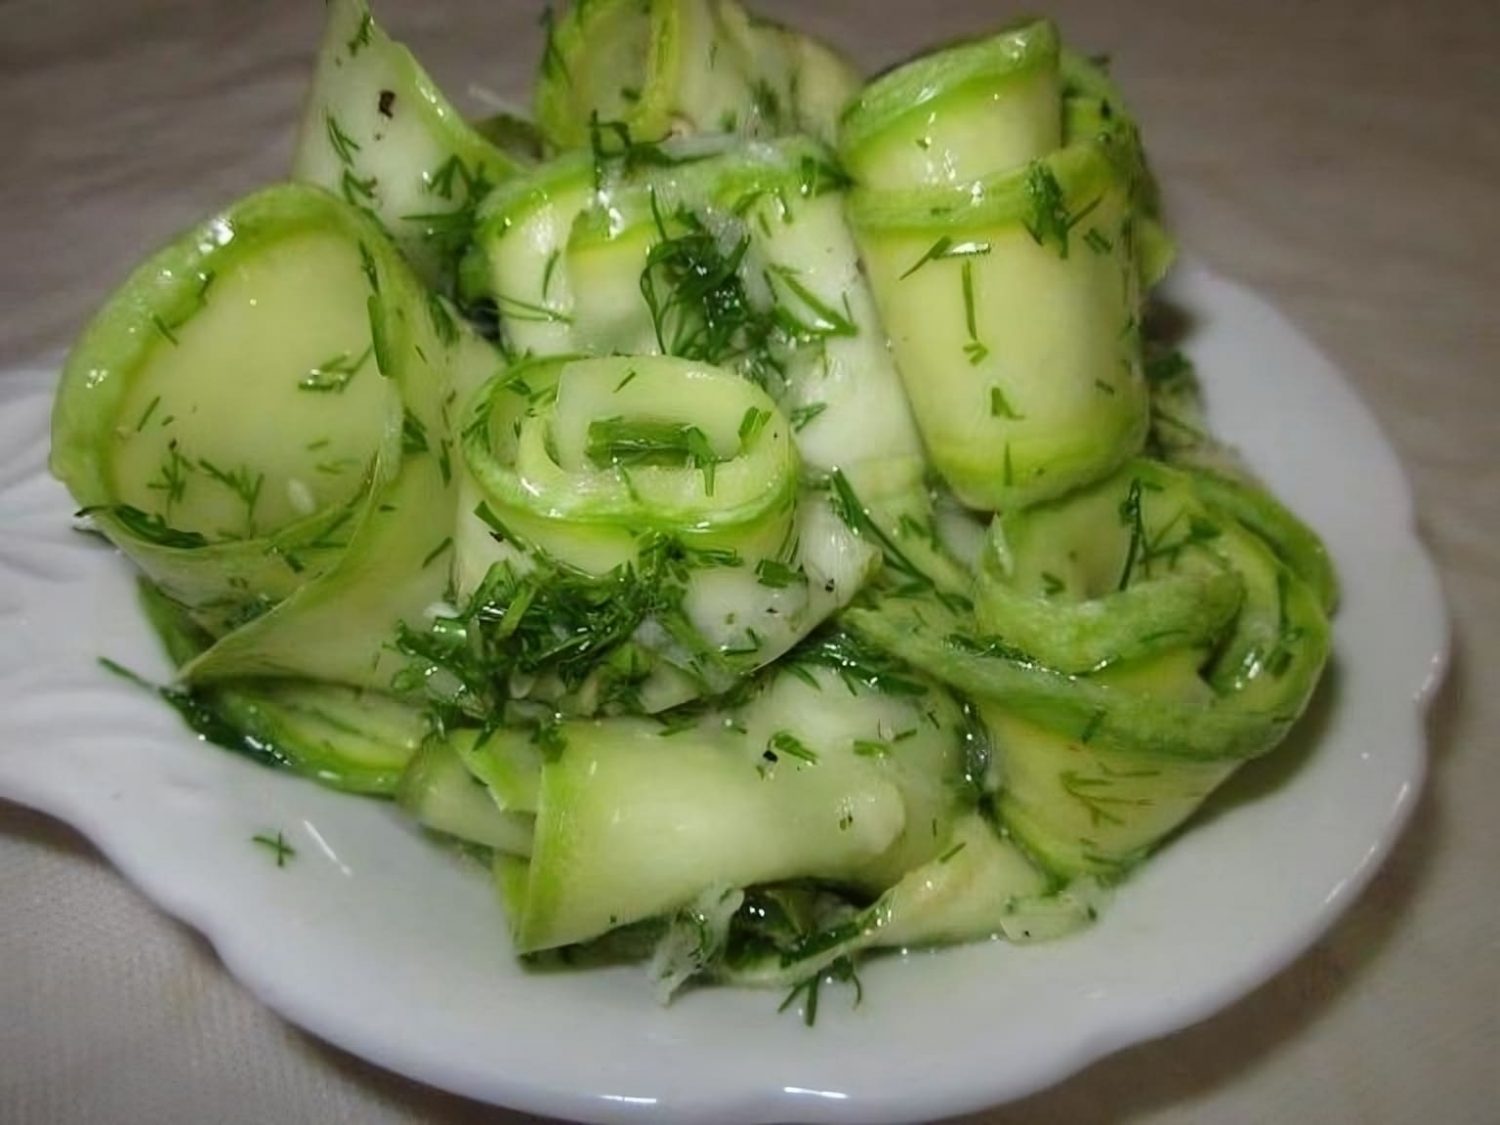 Marinated Young Zucchini - A Culinary Delight Awaits!